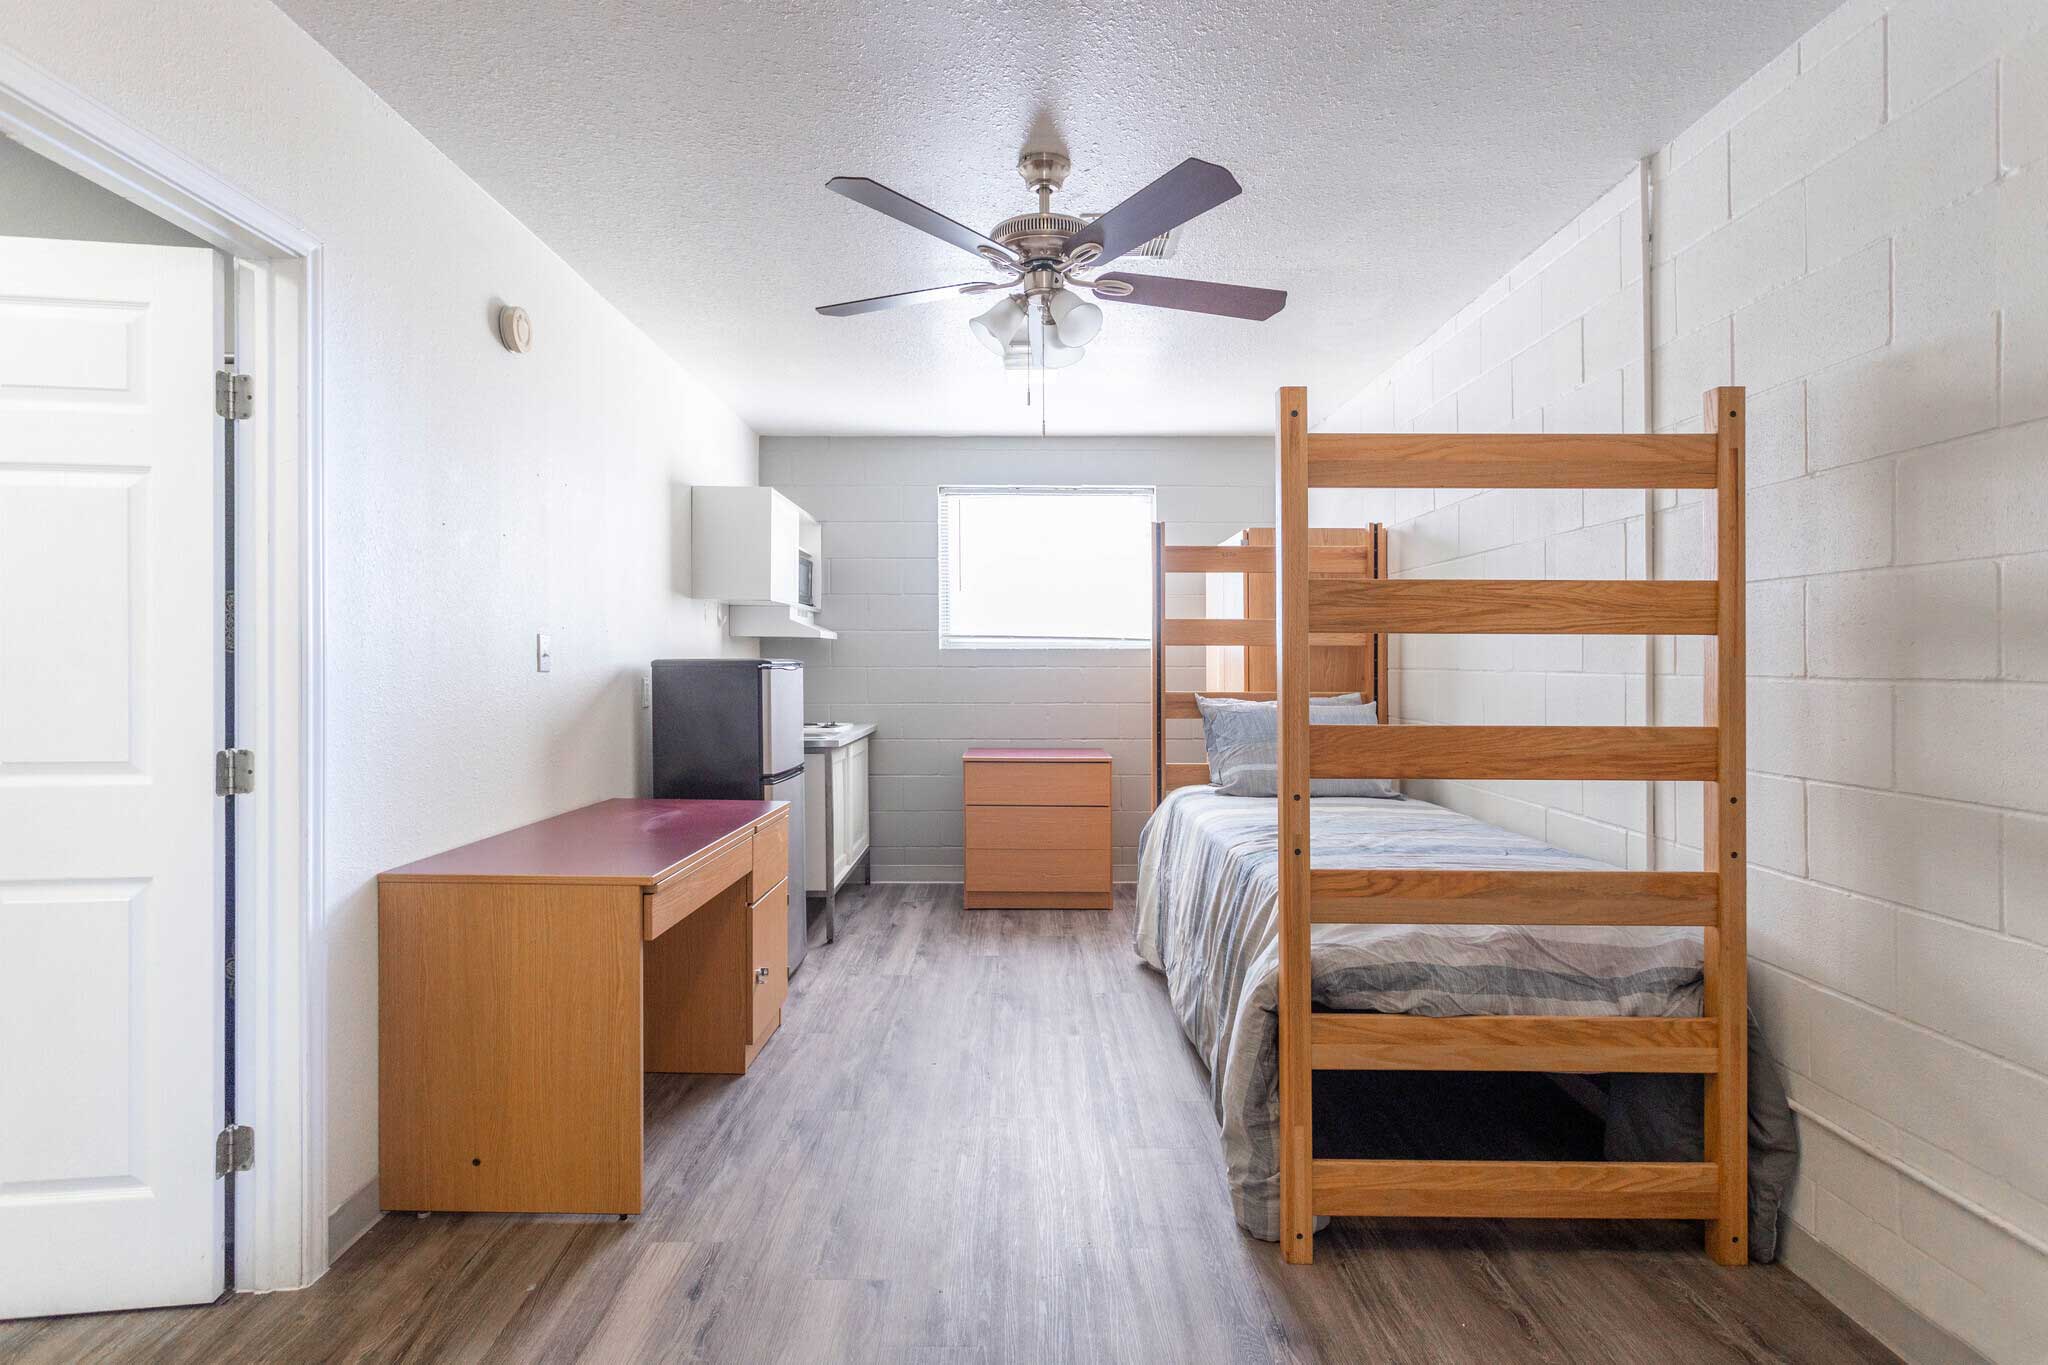 Bedroom With Ceiling Fan Available at Pelican Shores Apartments in Galveston, Texas